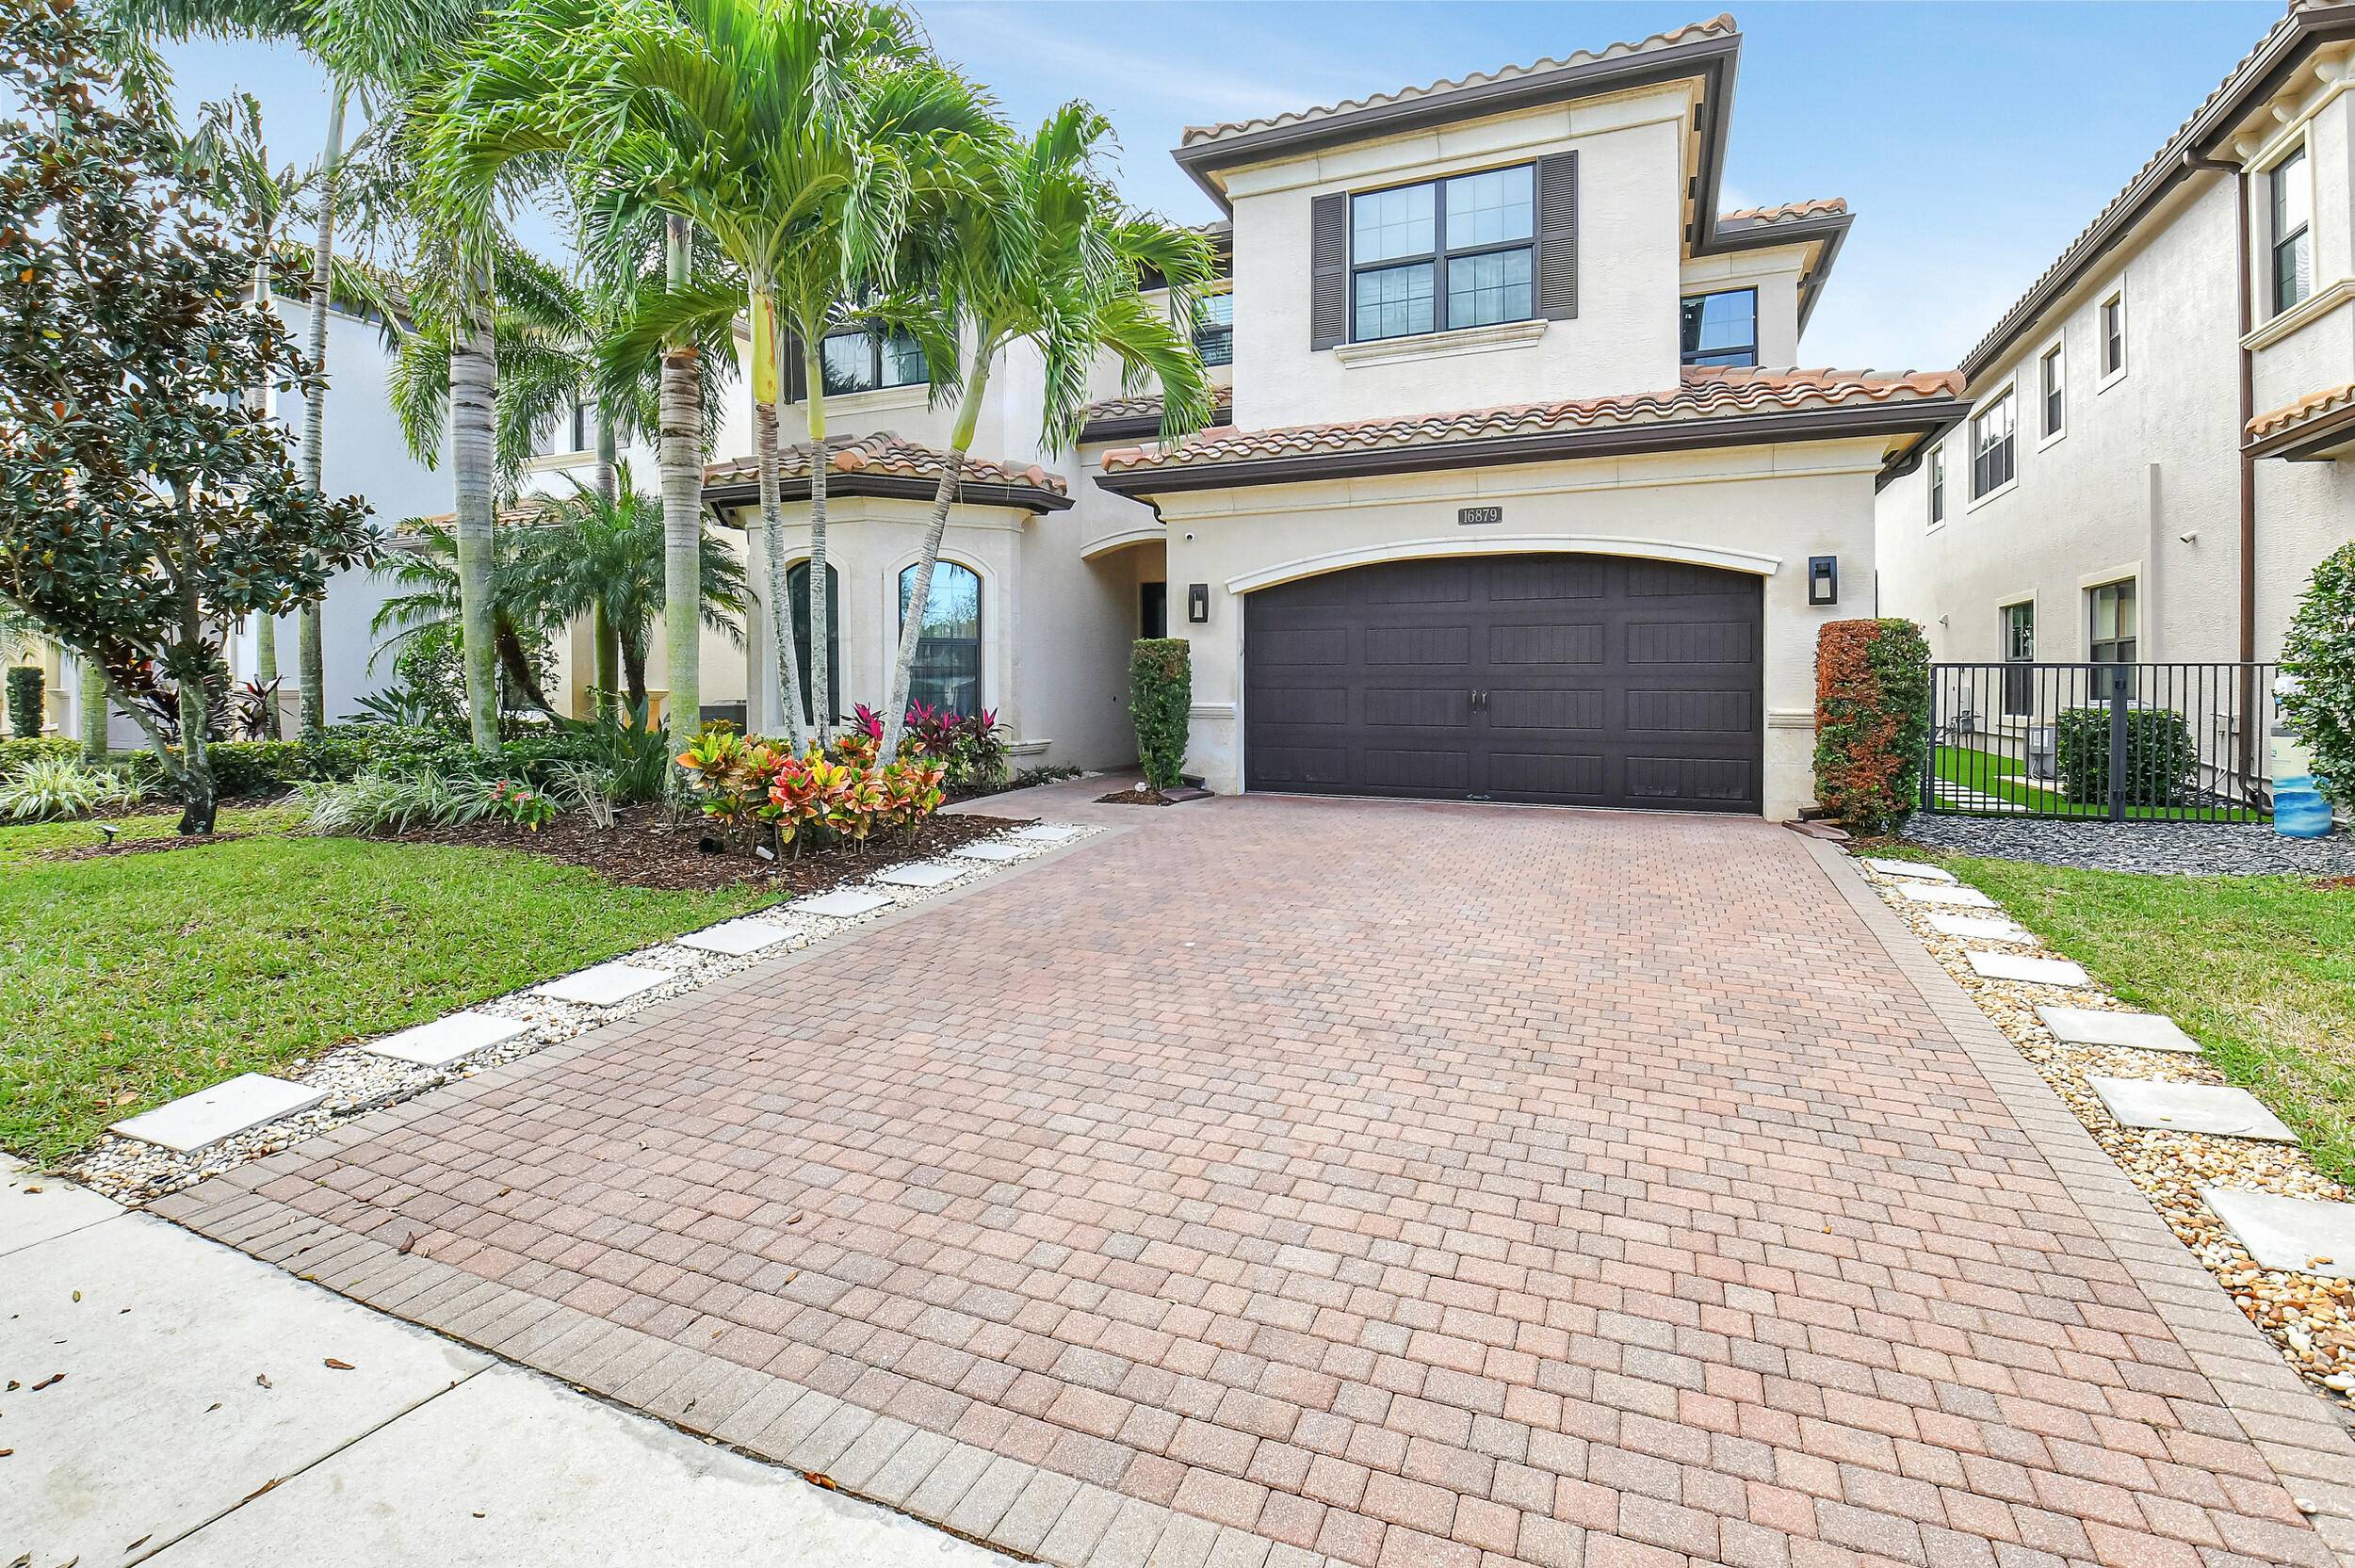 Welcome to luxurious living at its best in Delray Beach, Florida's coveted Bridges community !